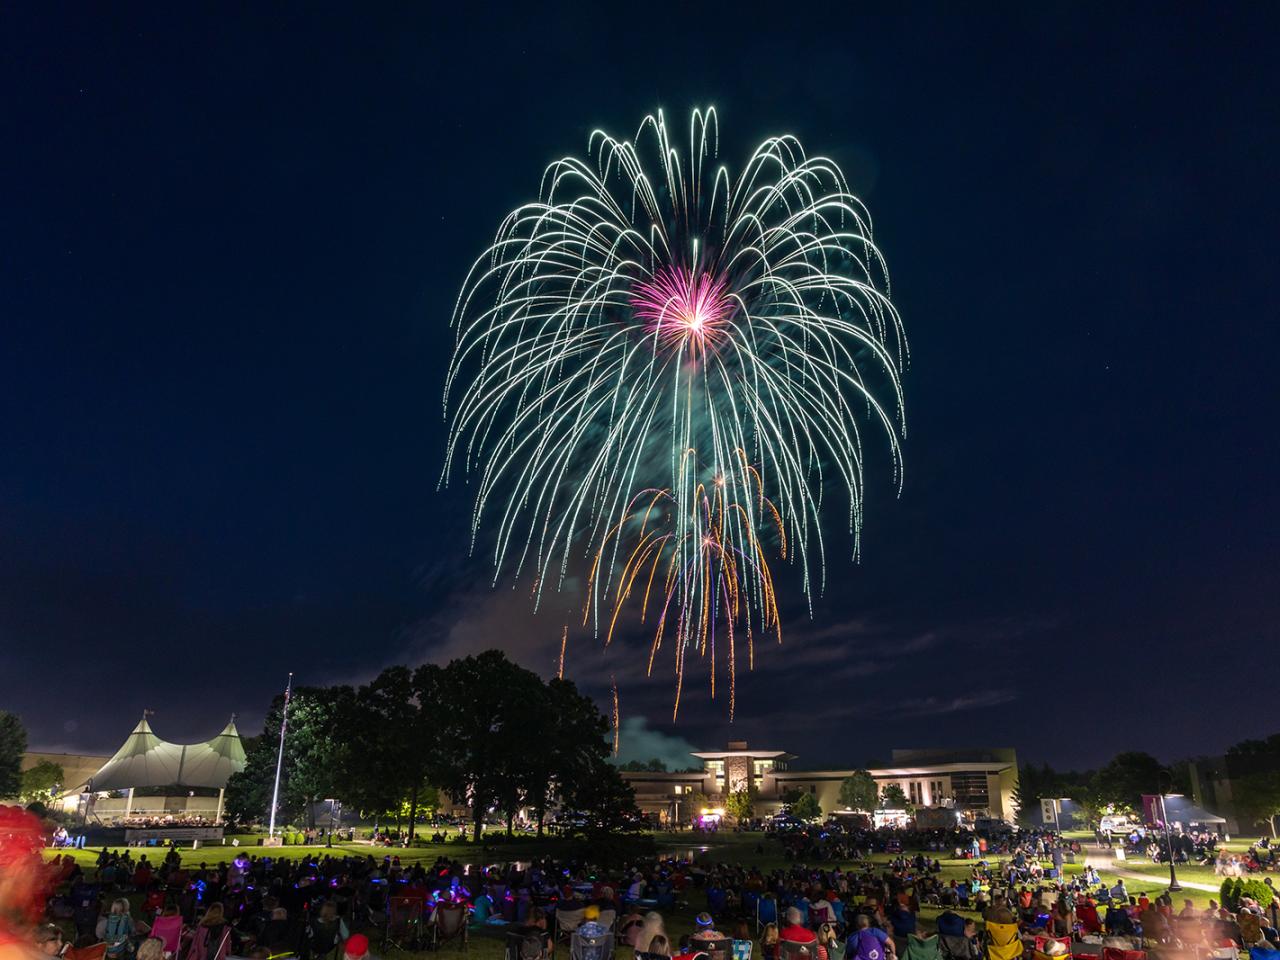 A firework fills the night sky over the Warner Center as onlookers fill the campus grounds